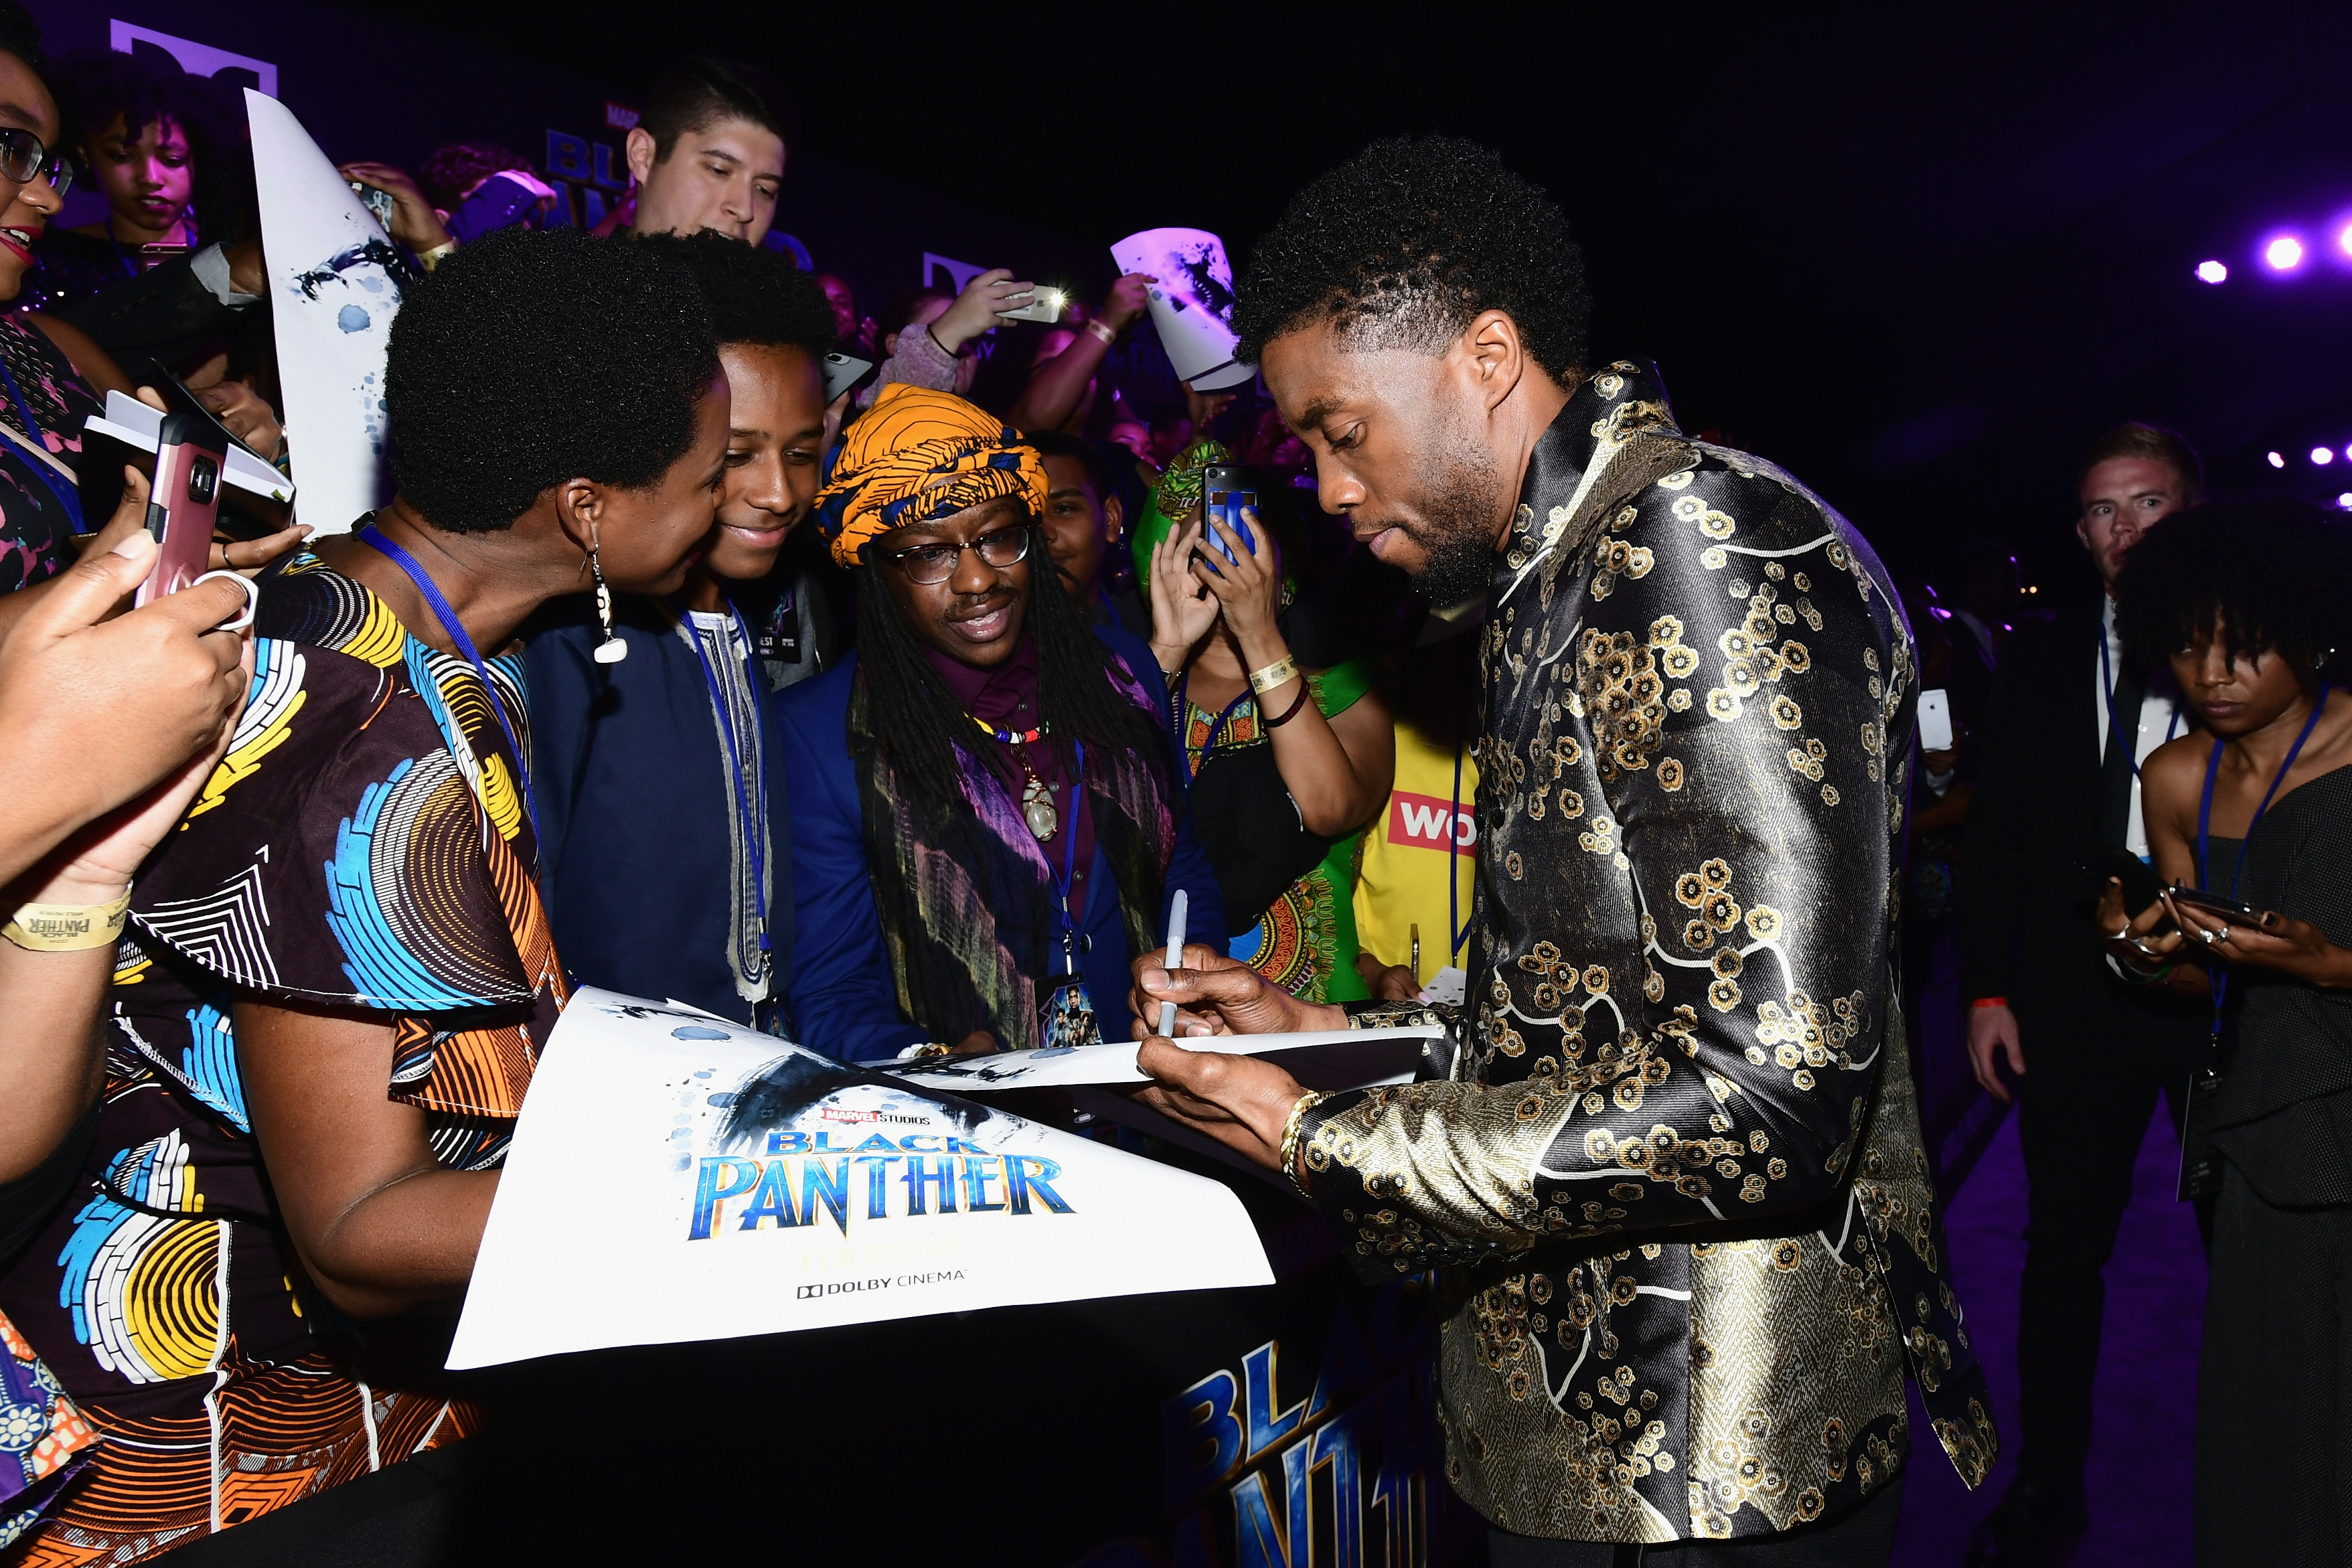 Premiere Of Disney And Marvel's 'Black Panther' - Red Carpet